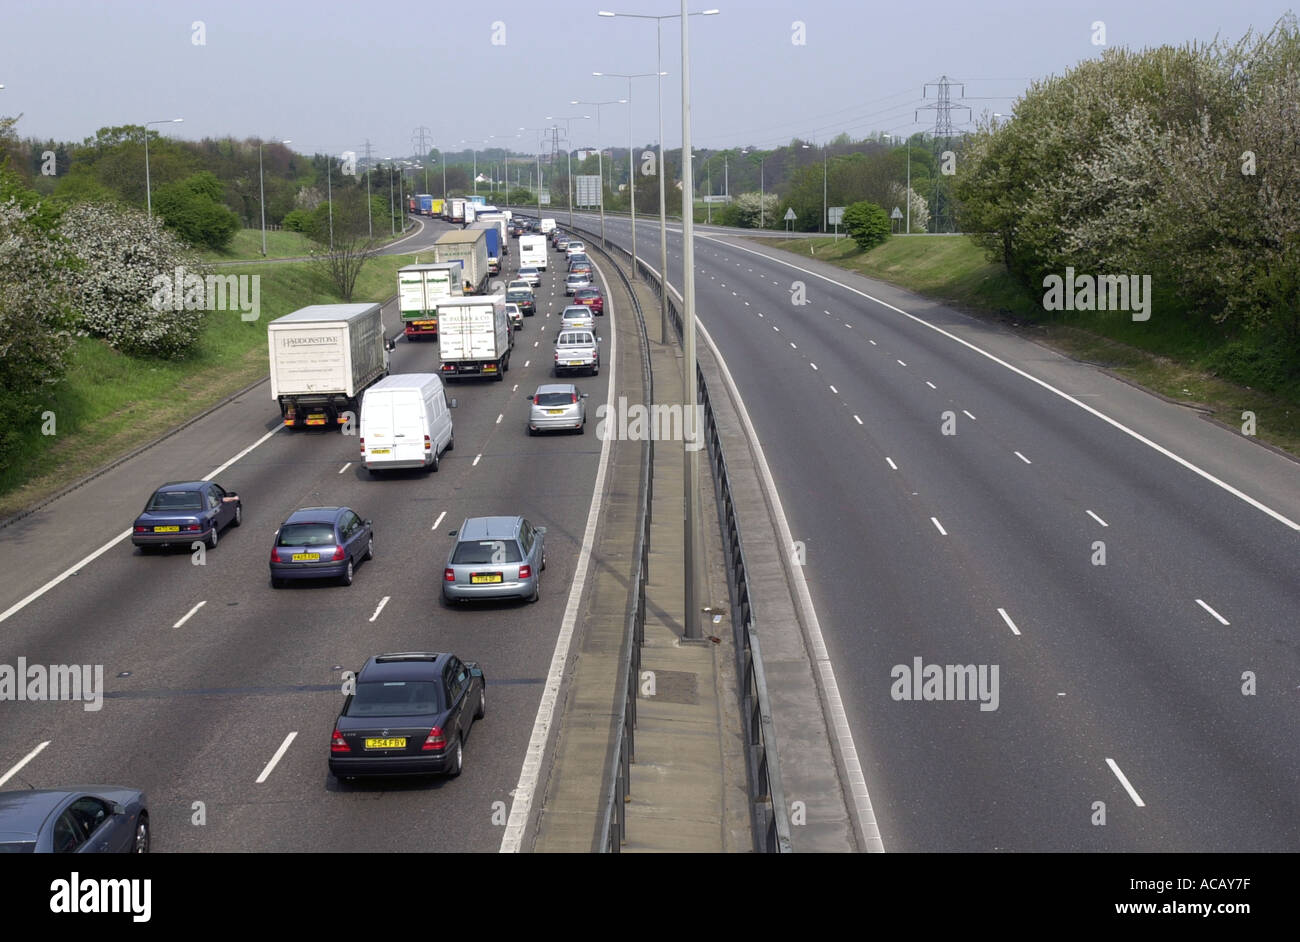 Heavy traffic on the M1 motorway northbound with few cars on the opposite carriageway uk Stock Photo